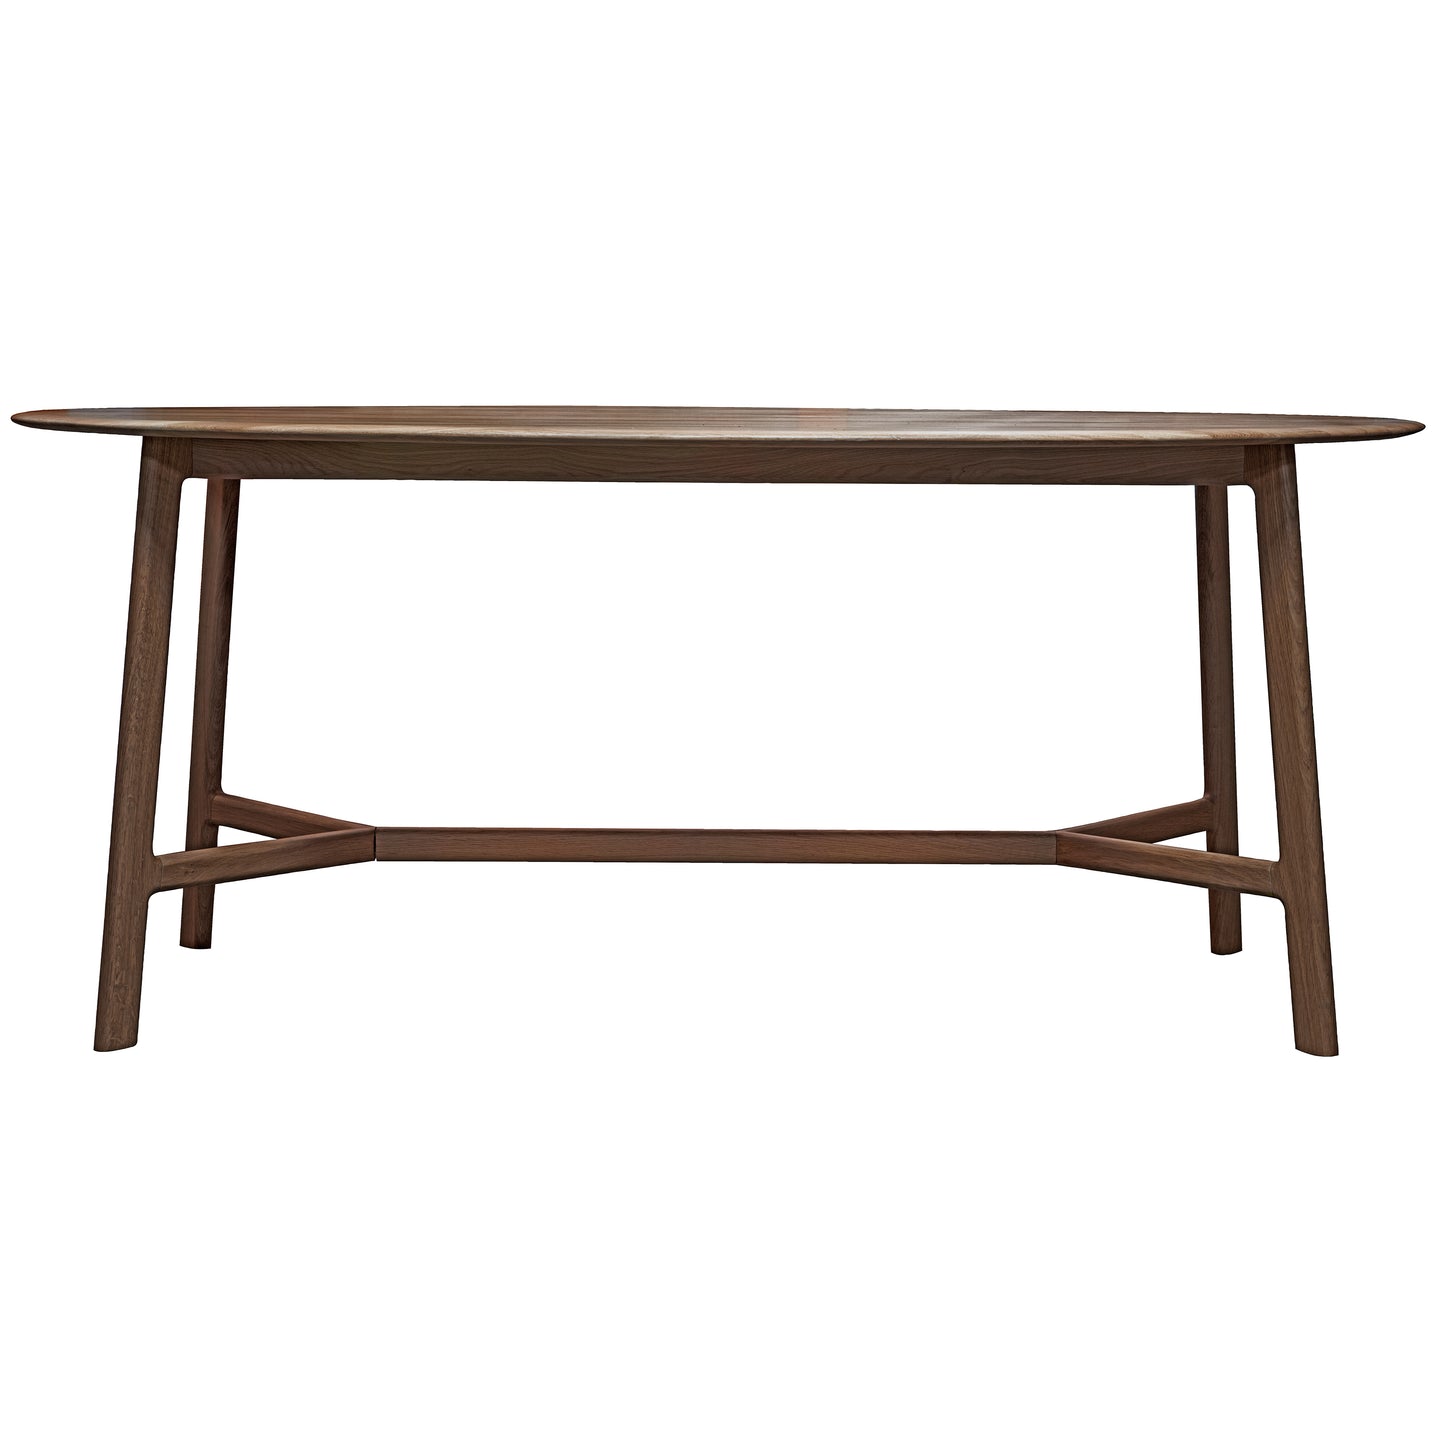 A Walnut Dining Table with wooden top, perfect for home furniture and interior decor.